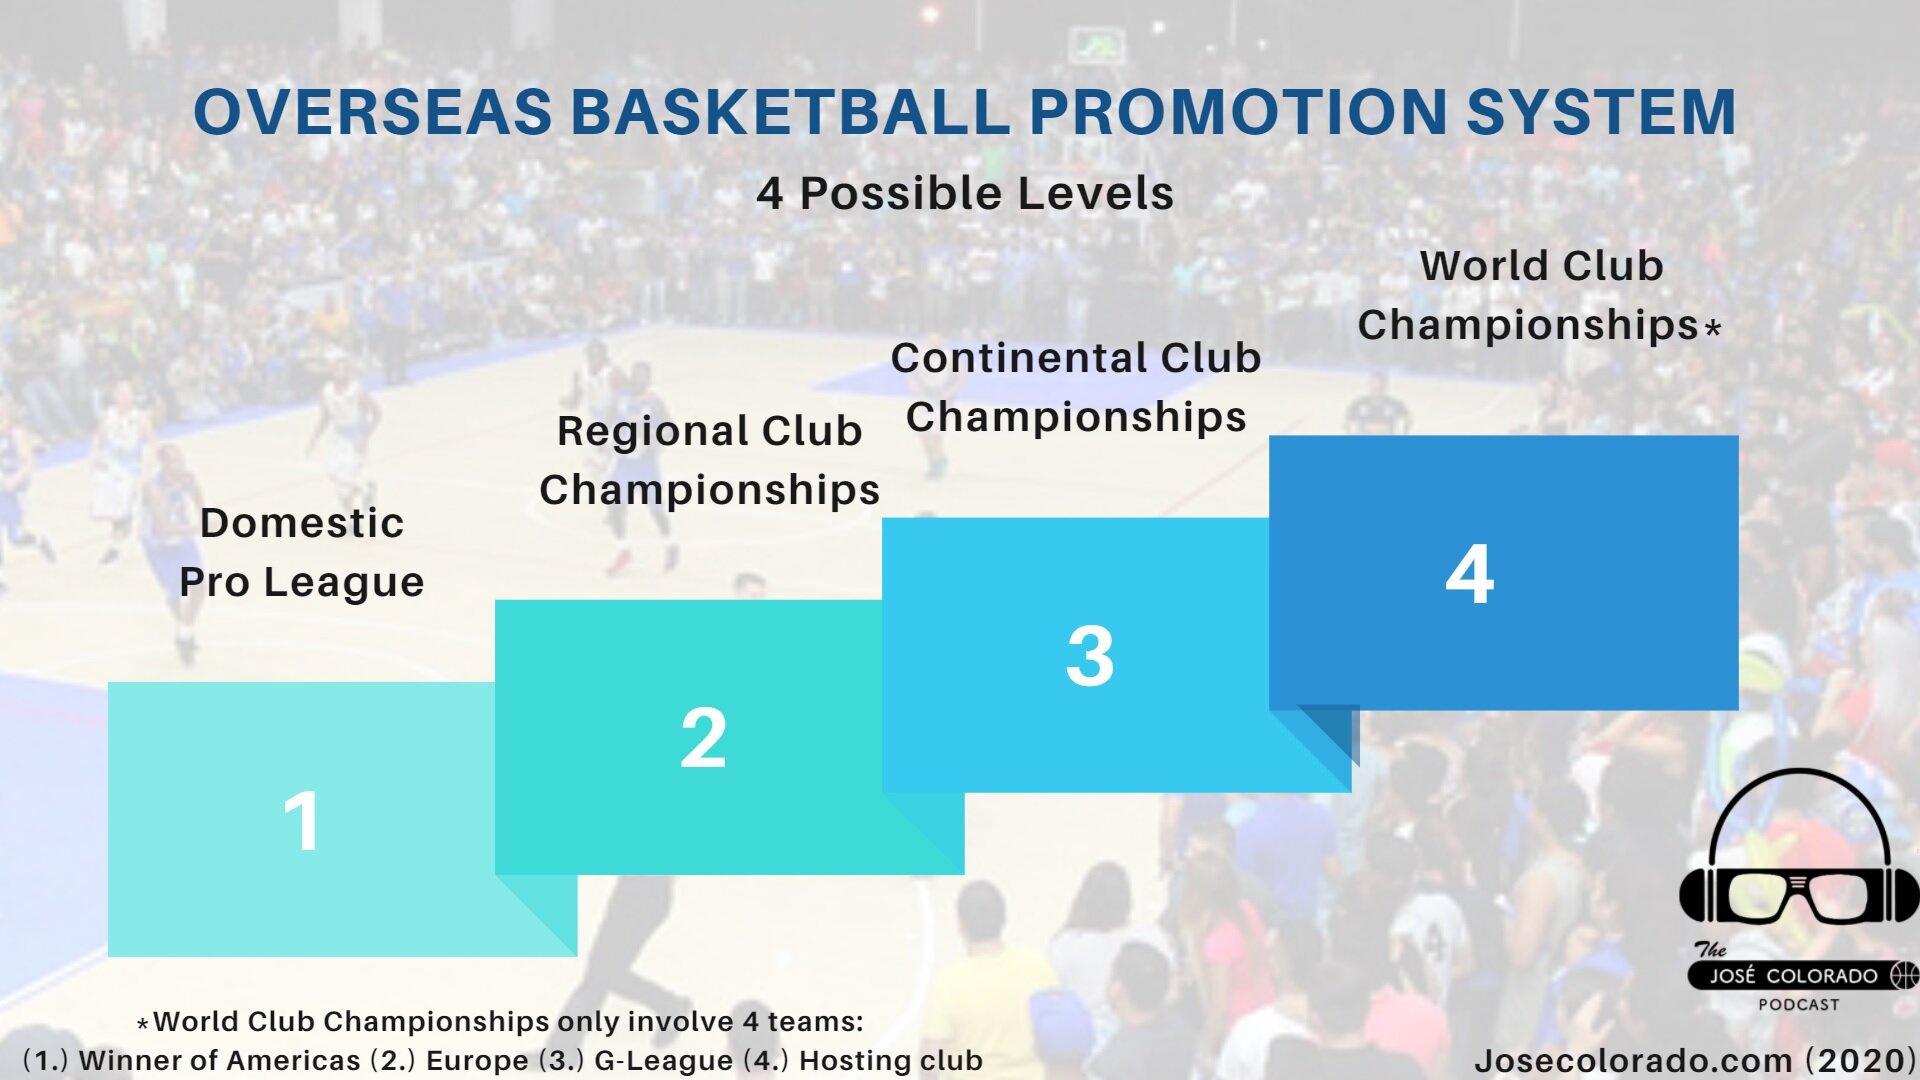 Overseas Basketball must incorporate a relegation/promotion system for its professional teams.